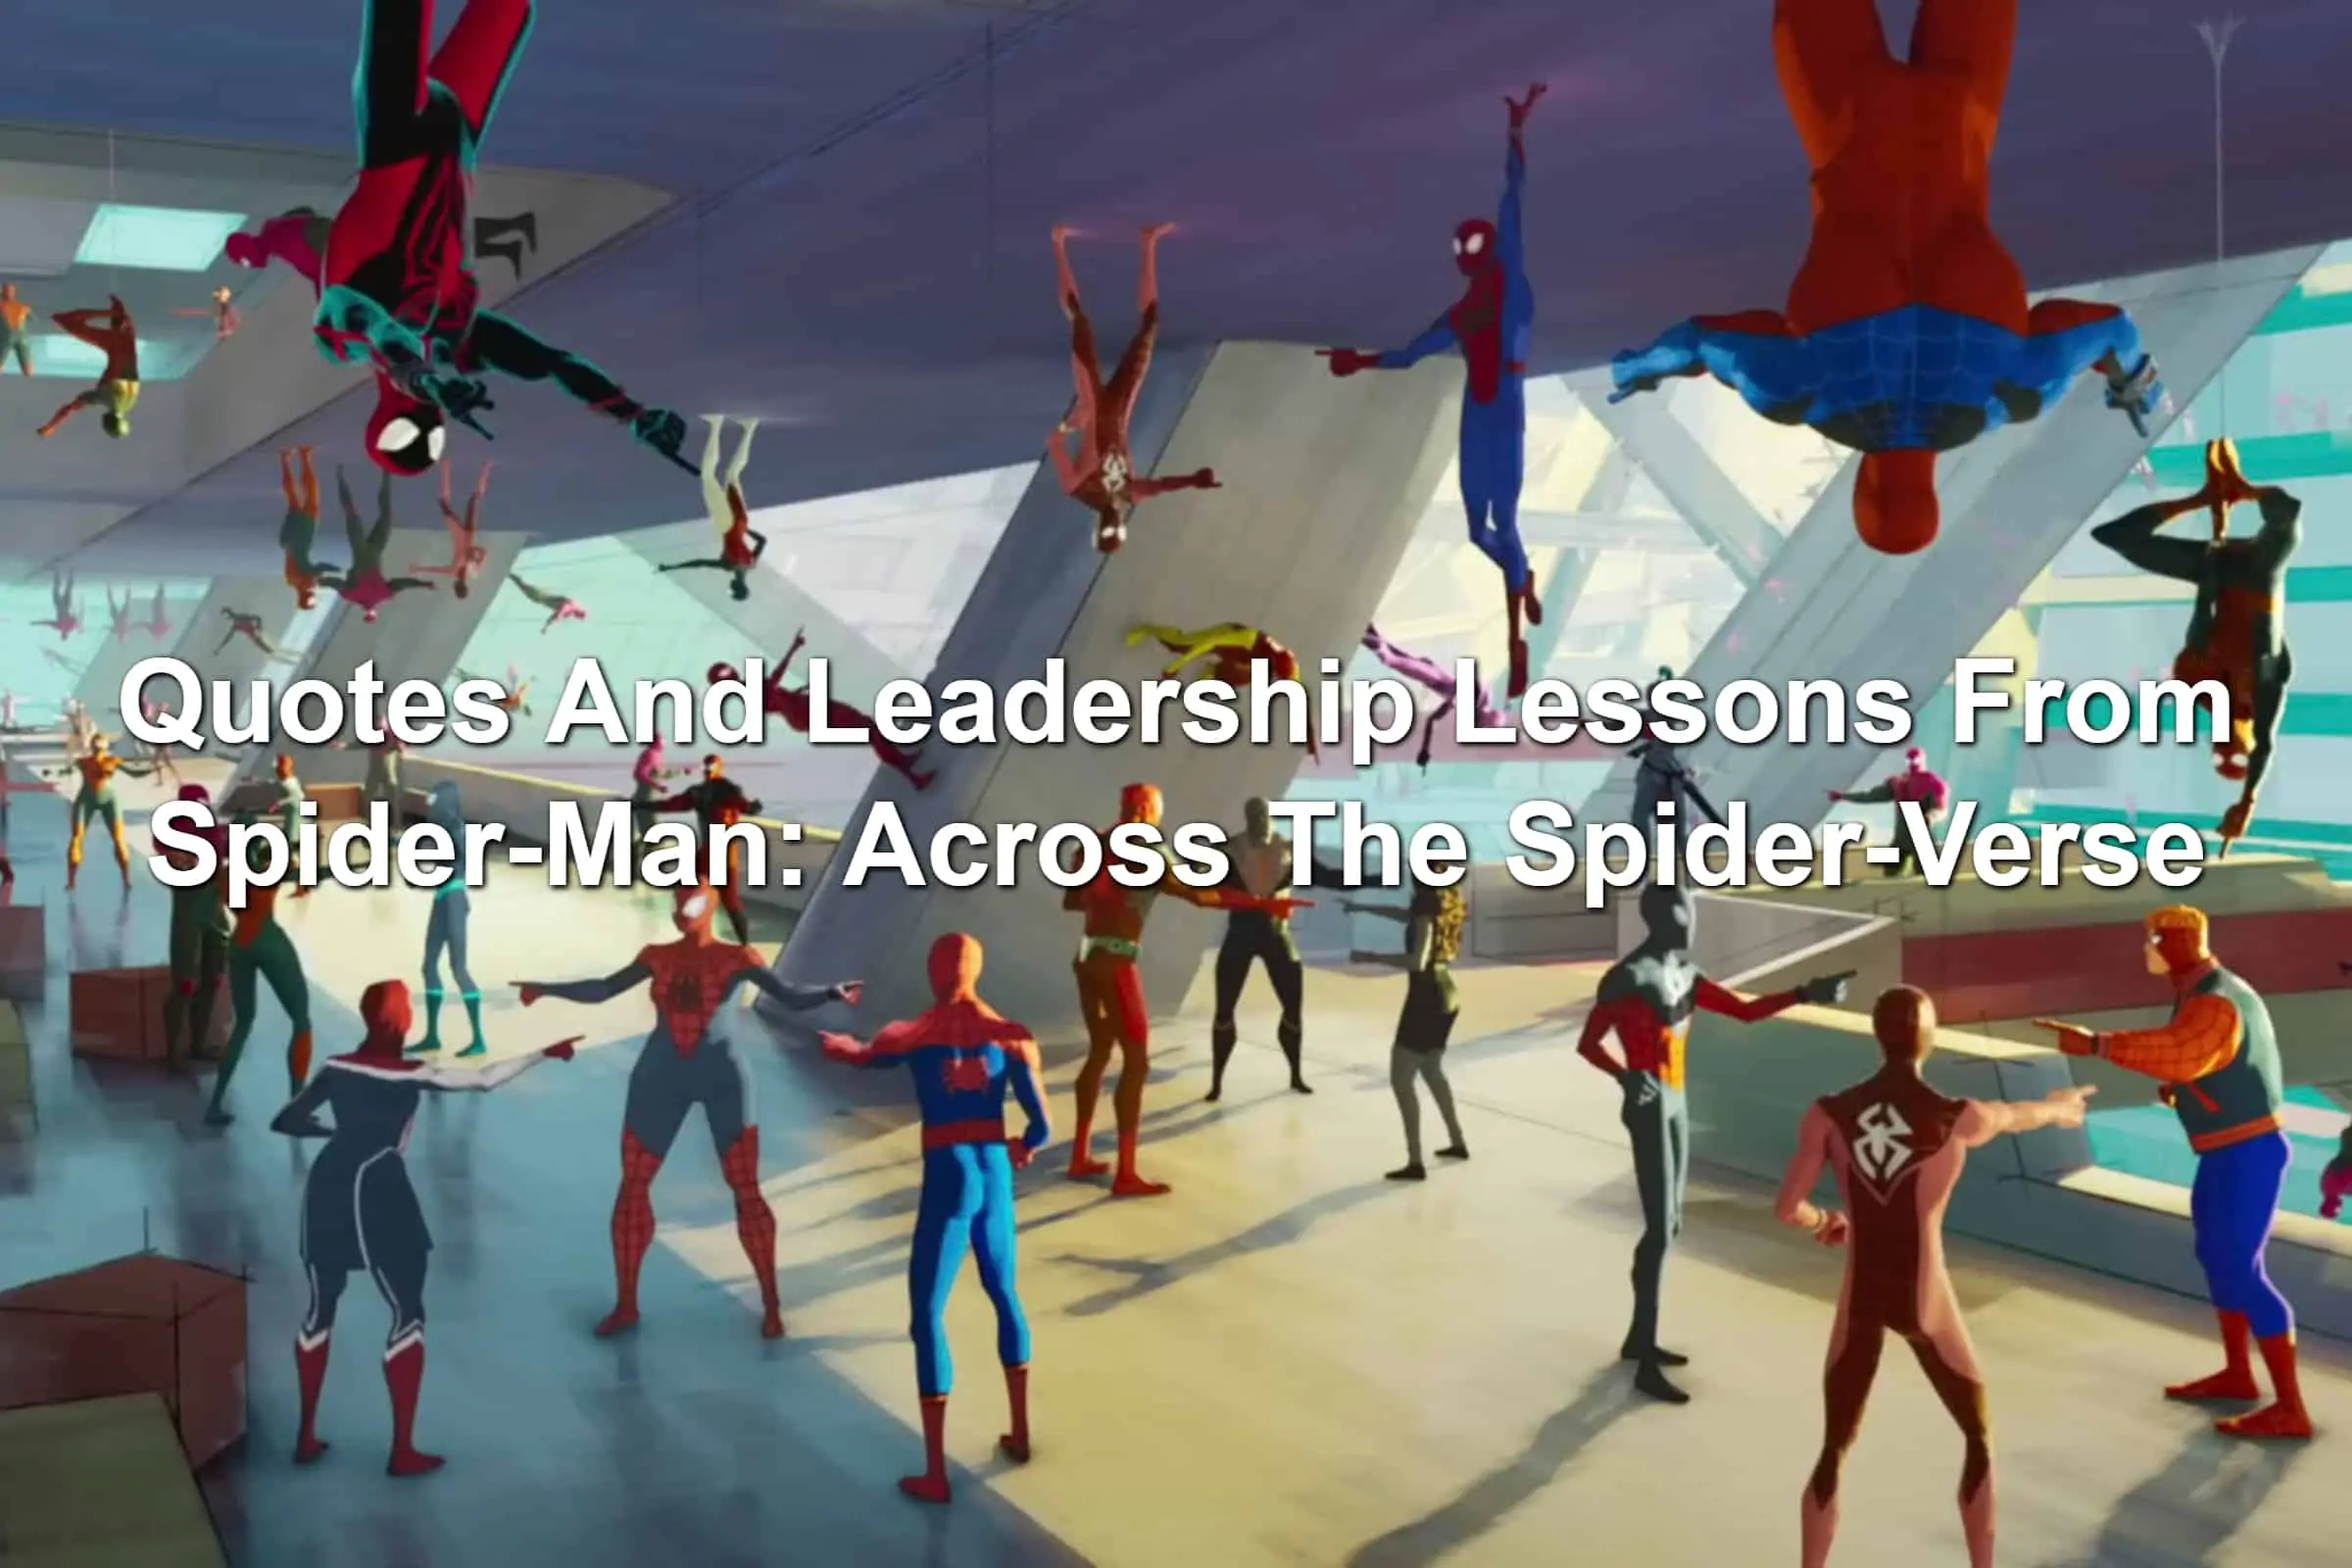 Scene from Spider-Man Across The Spider-Verse. Multiple Spider-Men are pointing at each other, similar to the meme from the 1968 cartoon